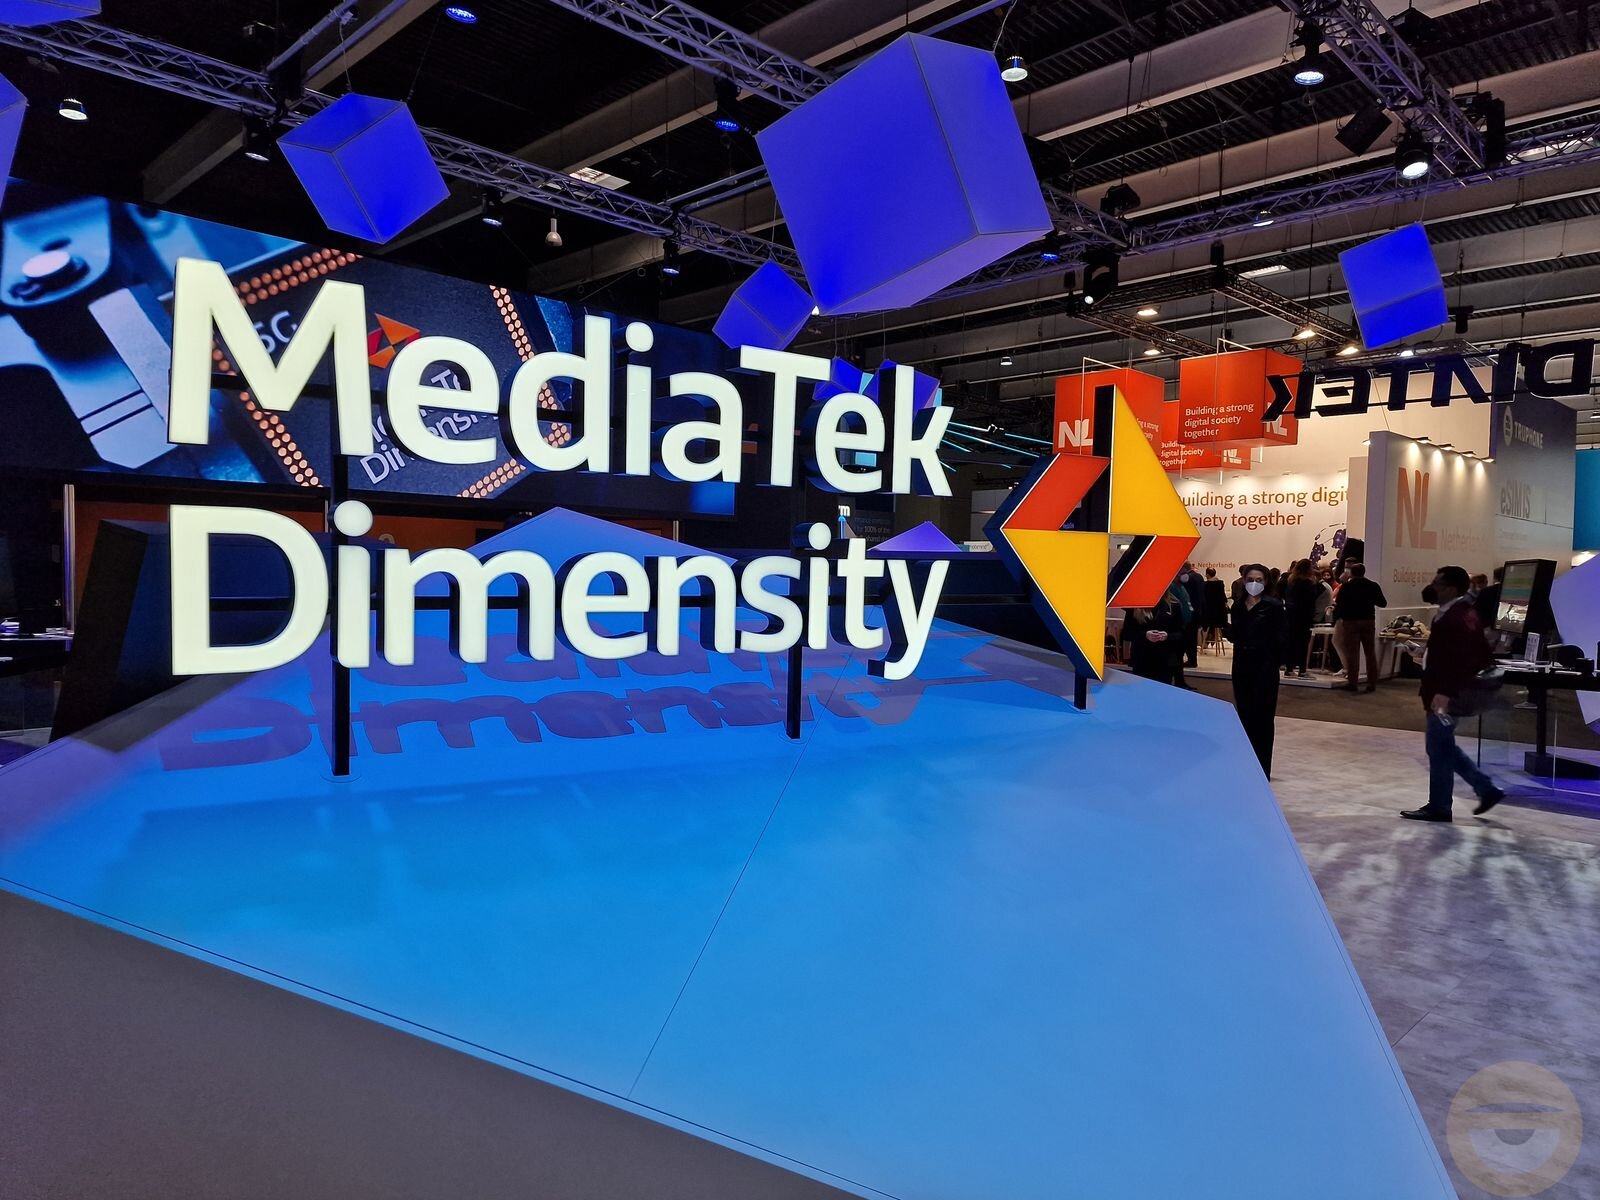 With an unconventional design and superior performance, the MediaTek Dimensity 9300 chipset – Mediatek